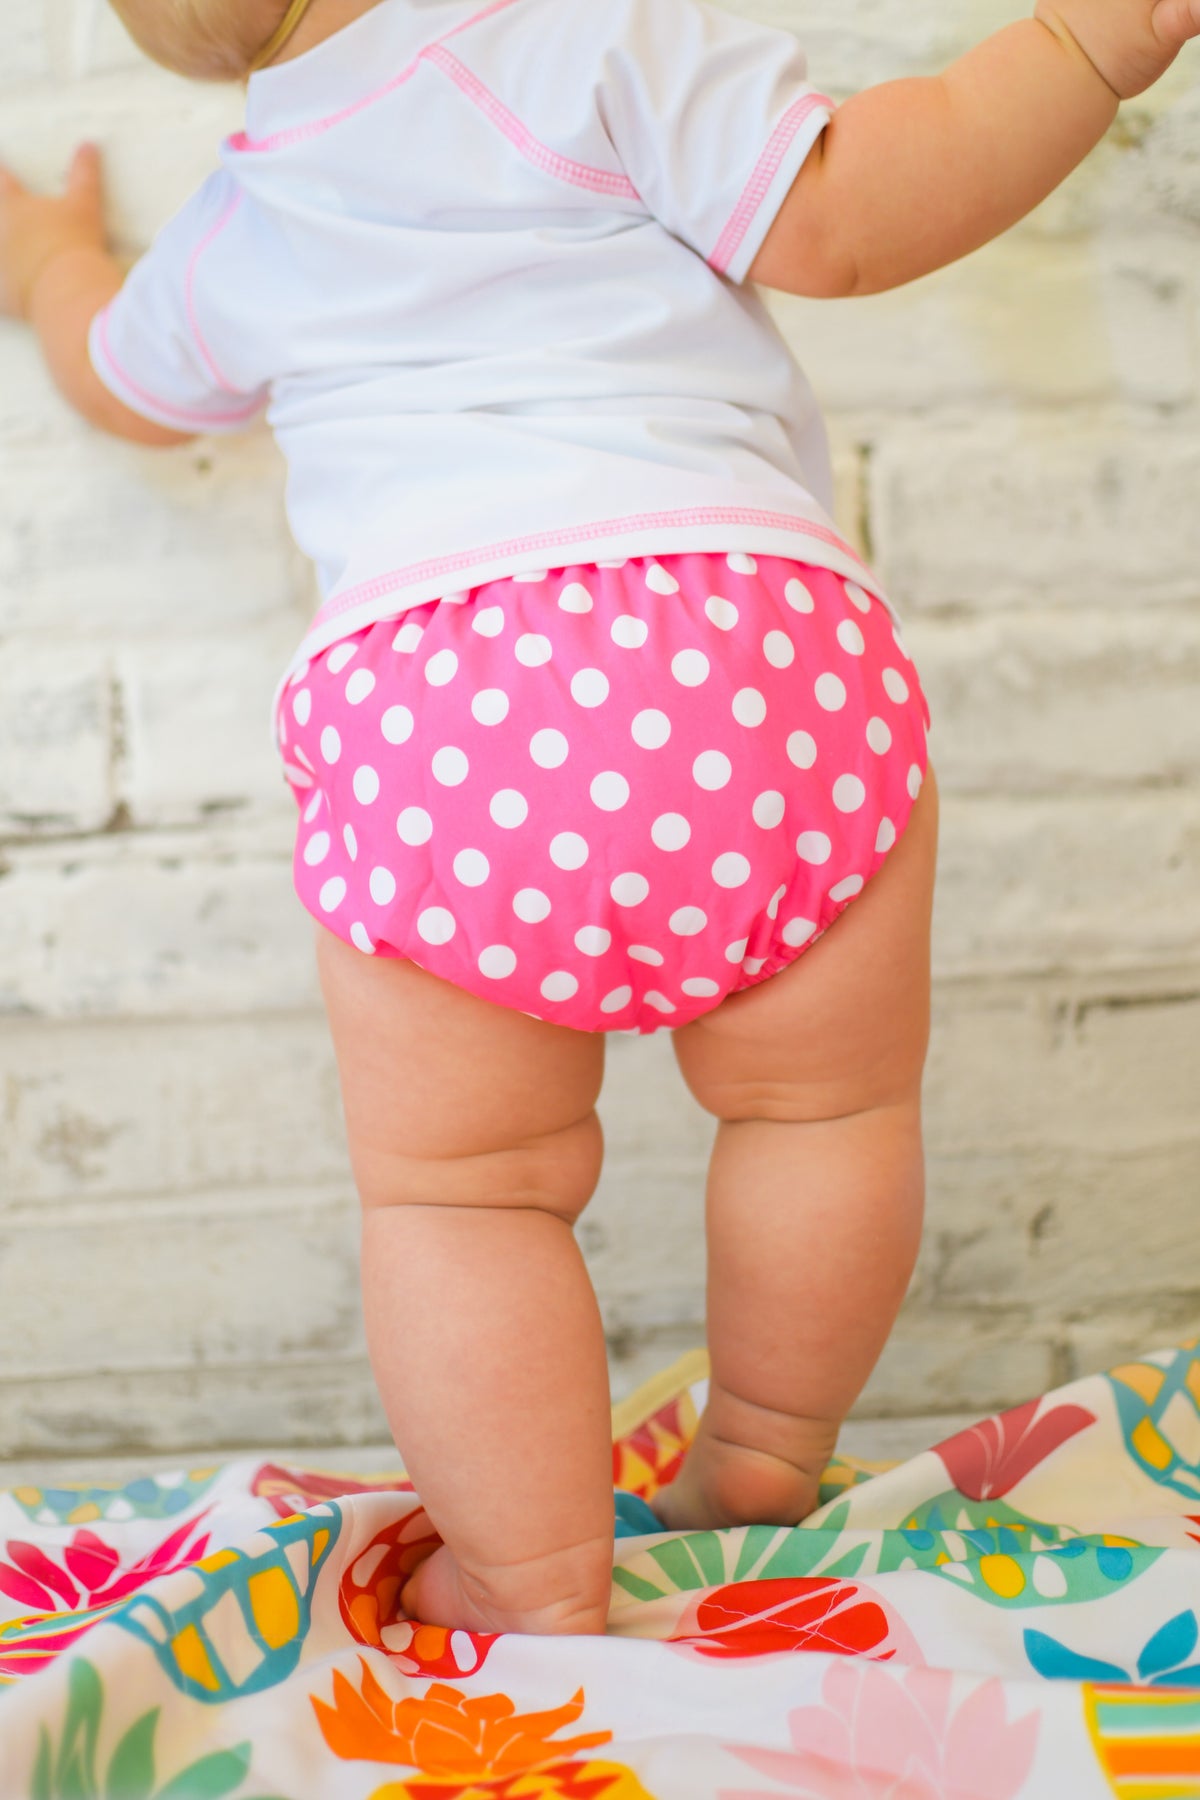 Boys and Girls Recycled Polyester UPF 50+ Swim Diaper Cover  | Rainbows